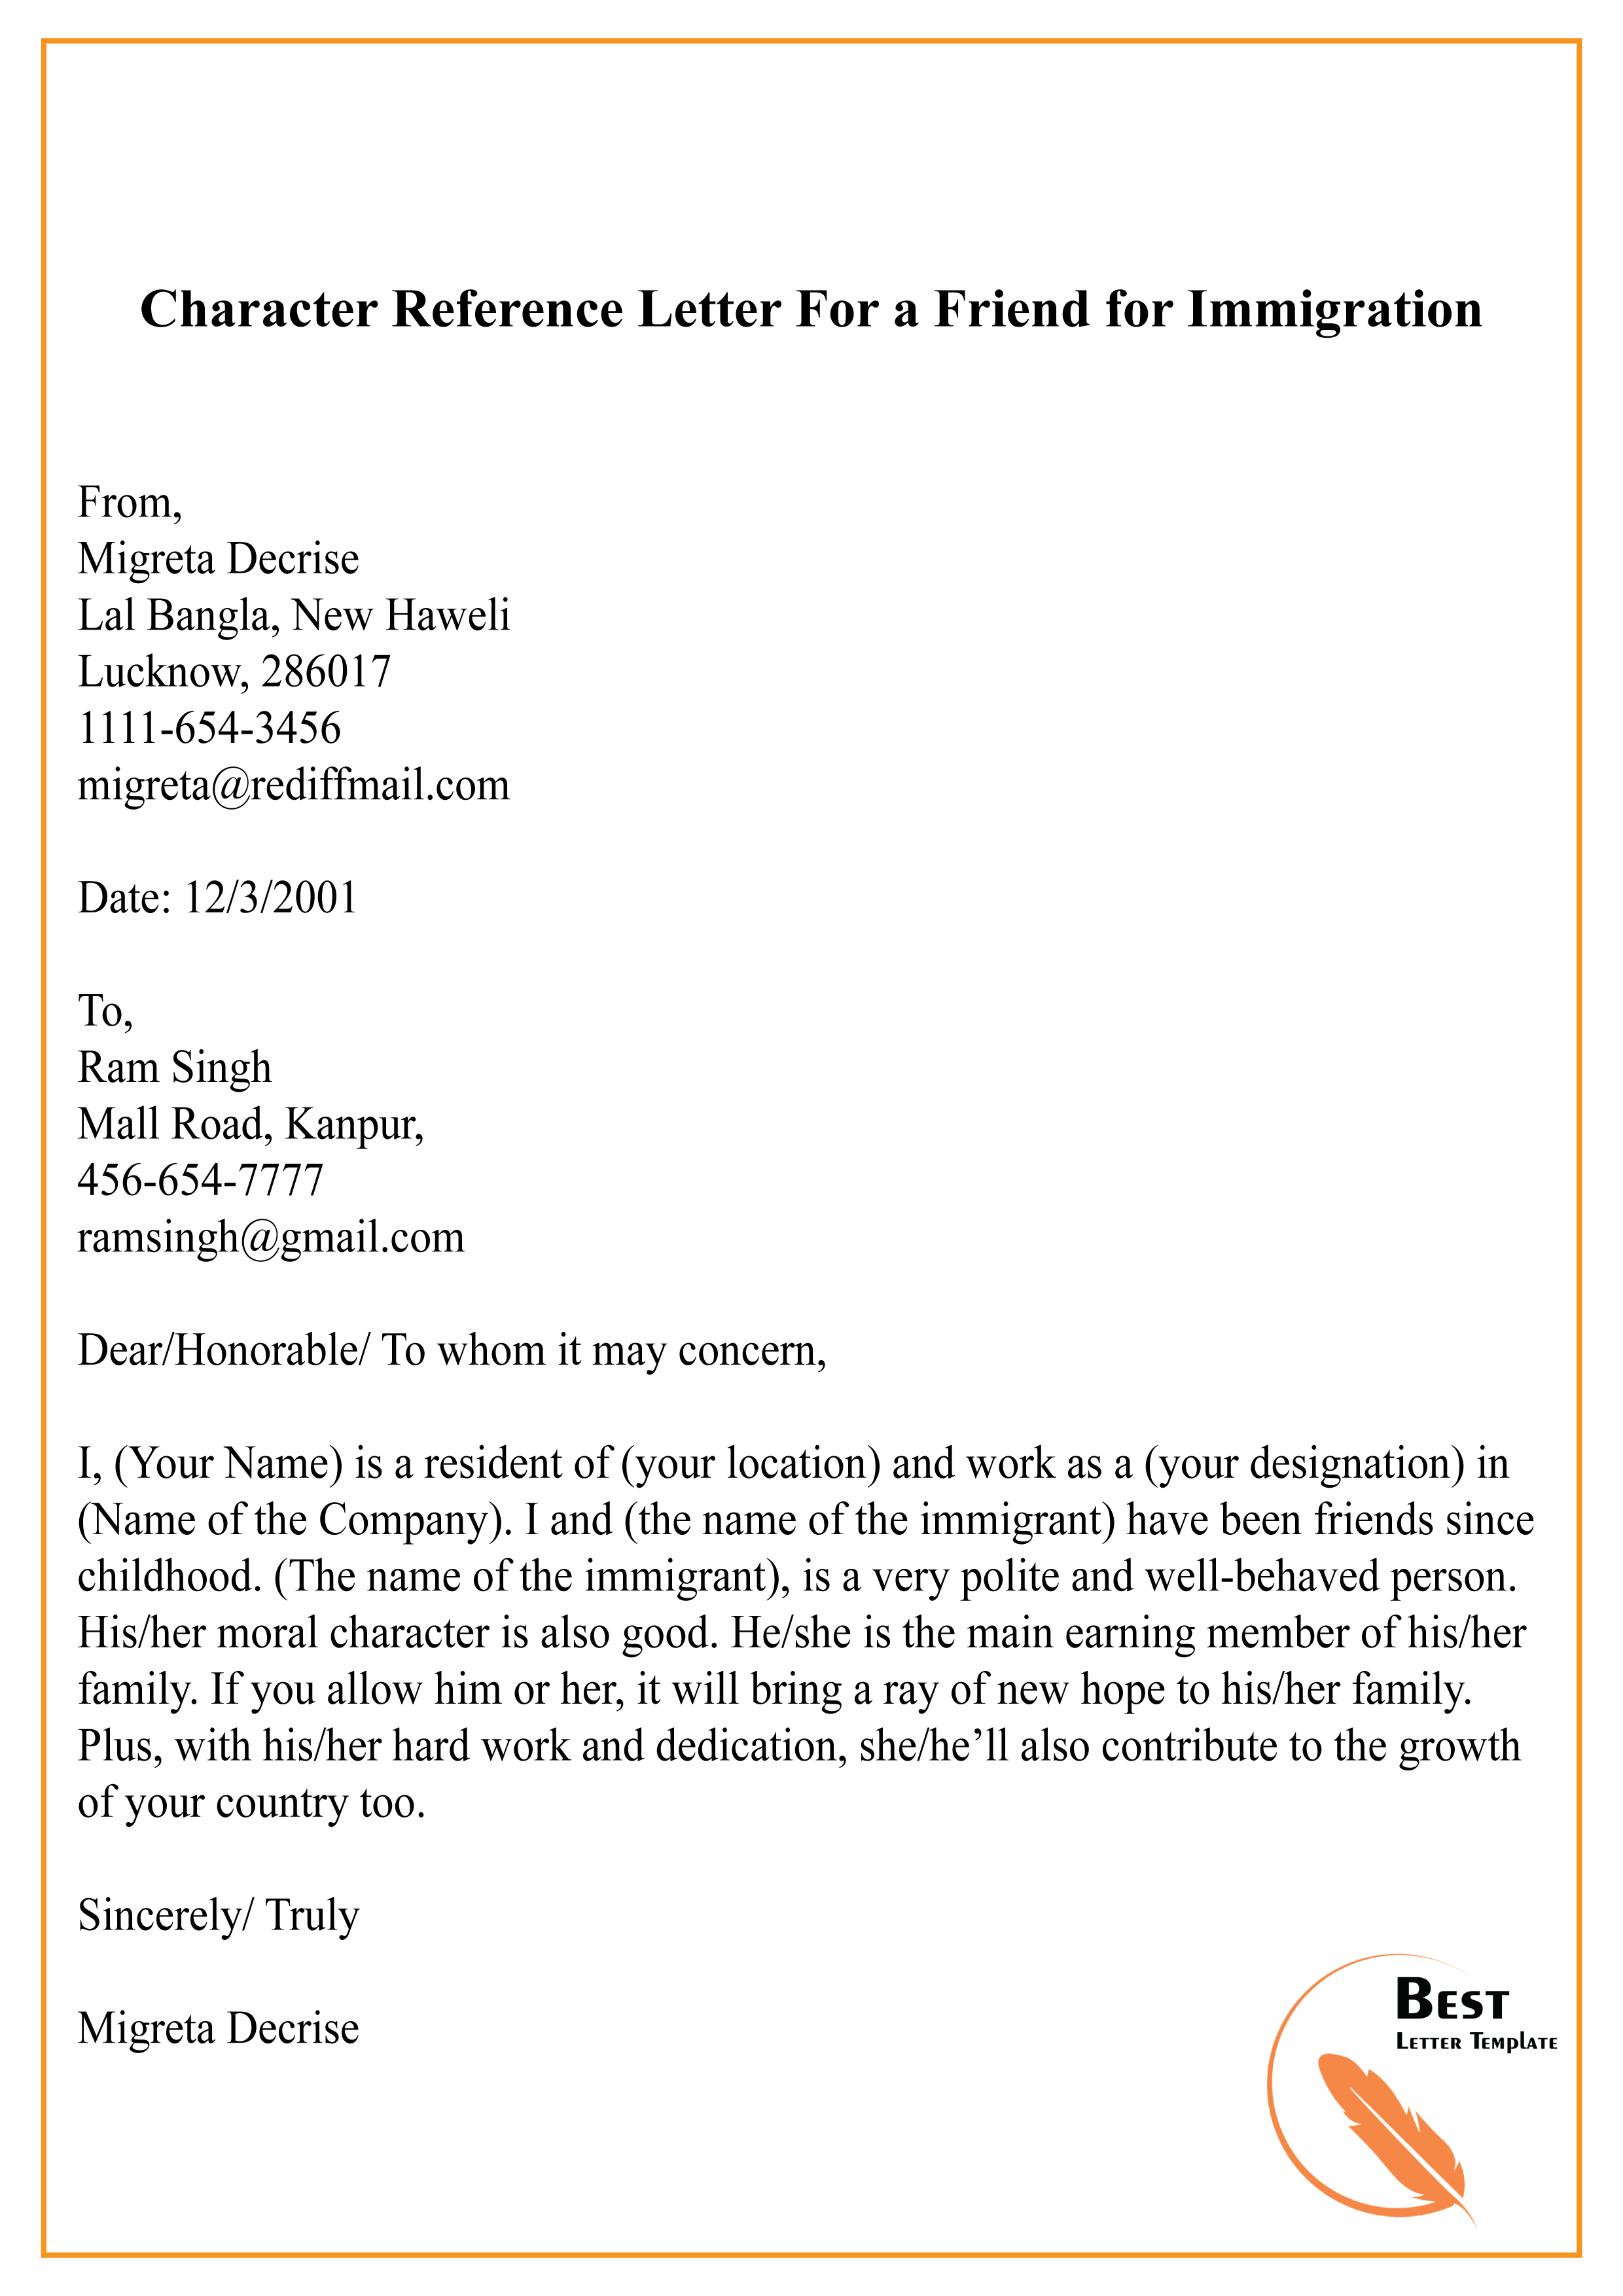 Sample Letter Of Good Character For Immigration